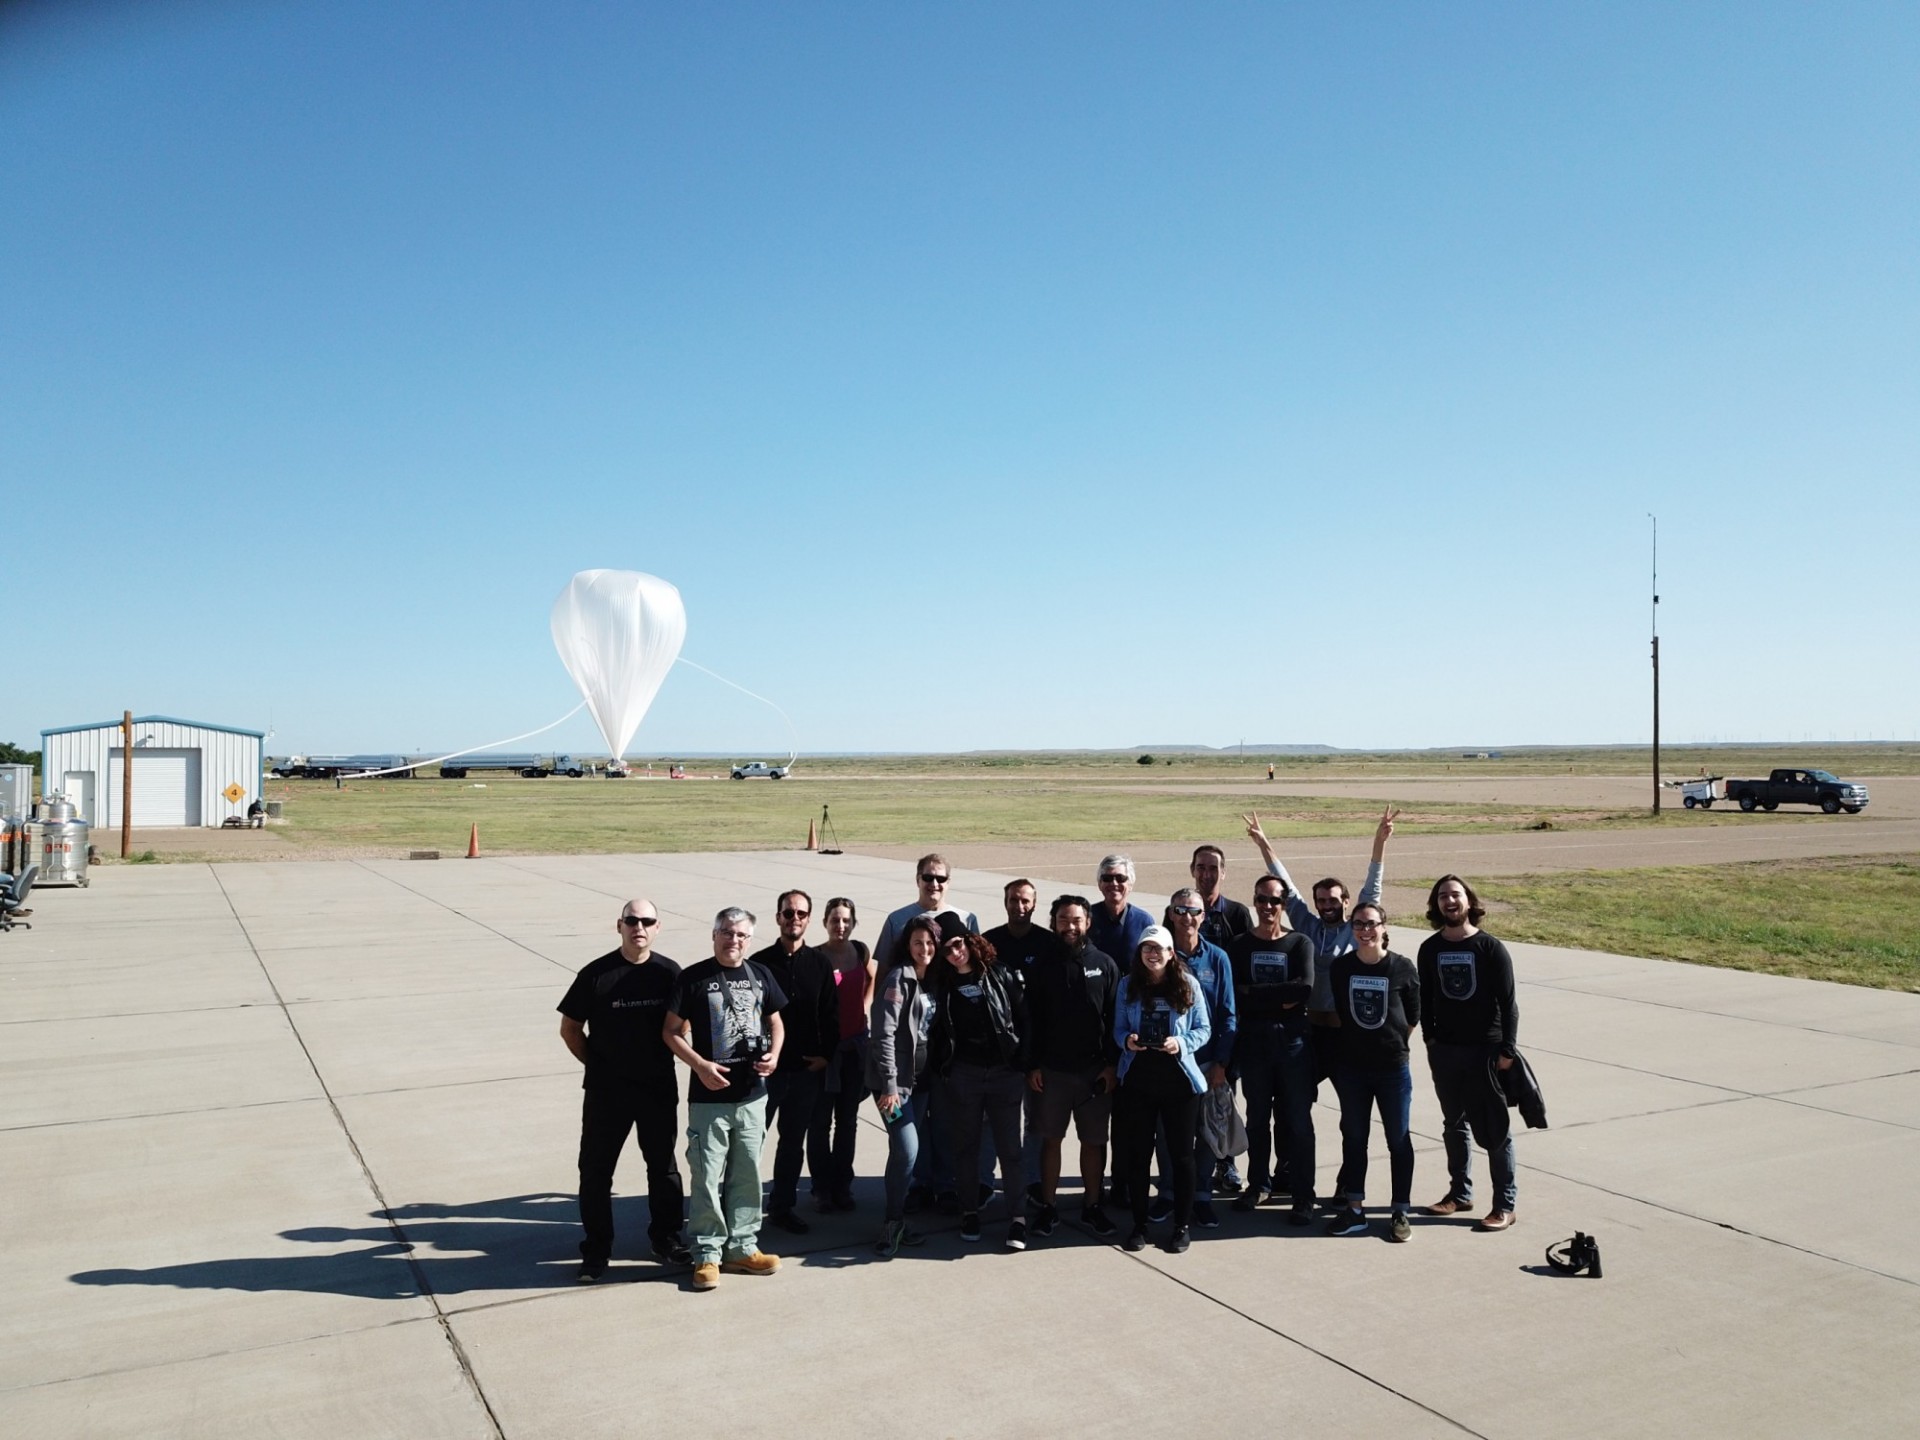 Photo of FIREBall team in front of balloon prior to 2018 launch.